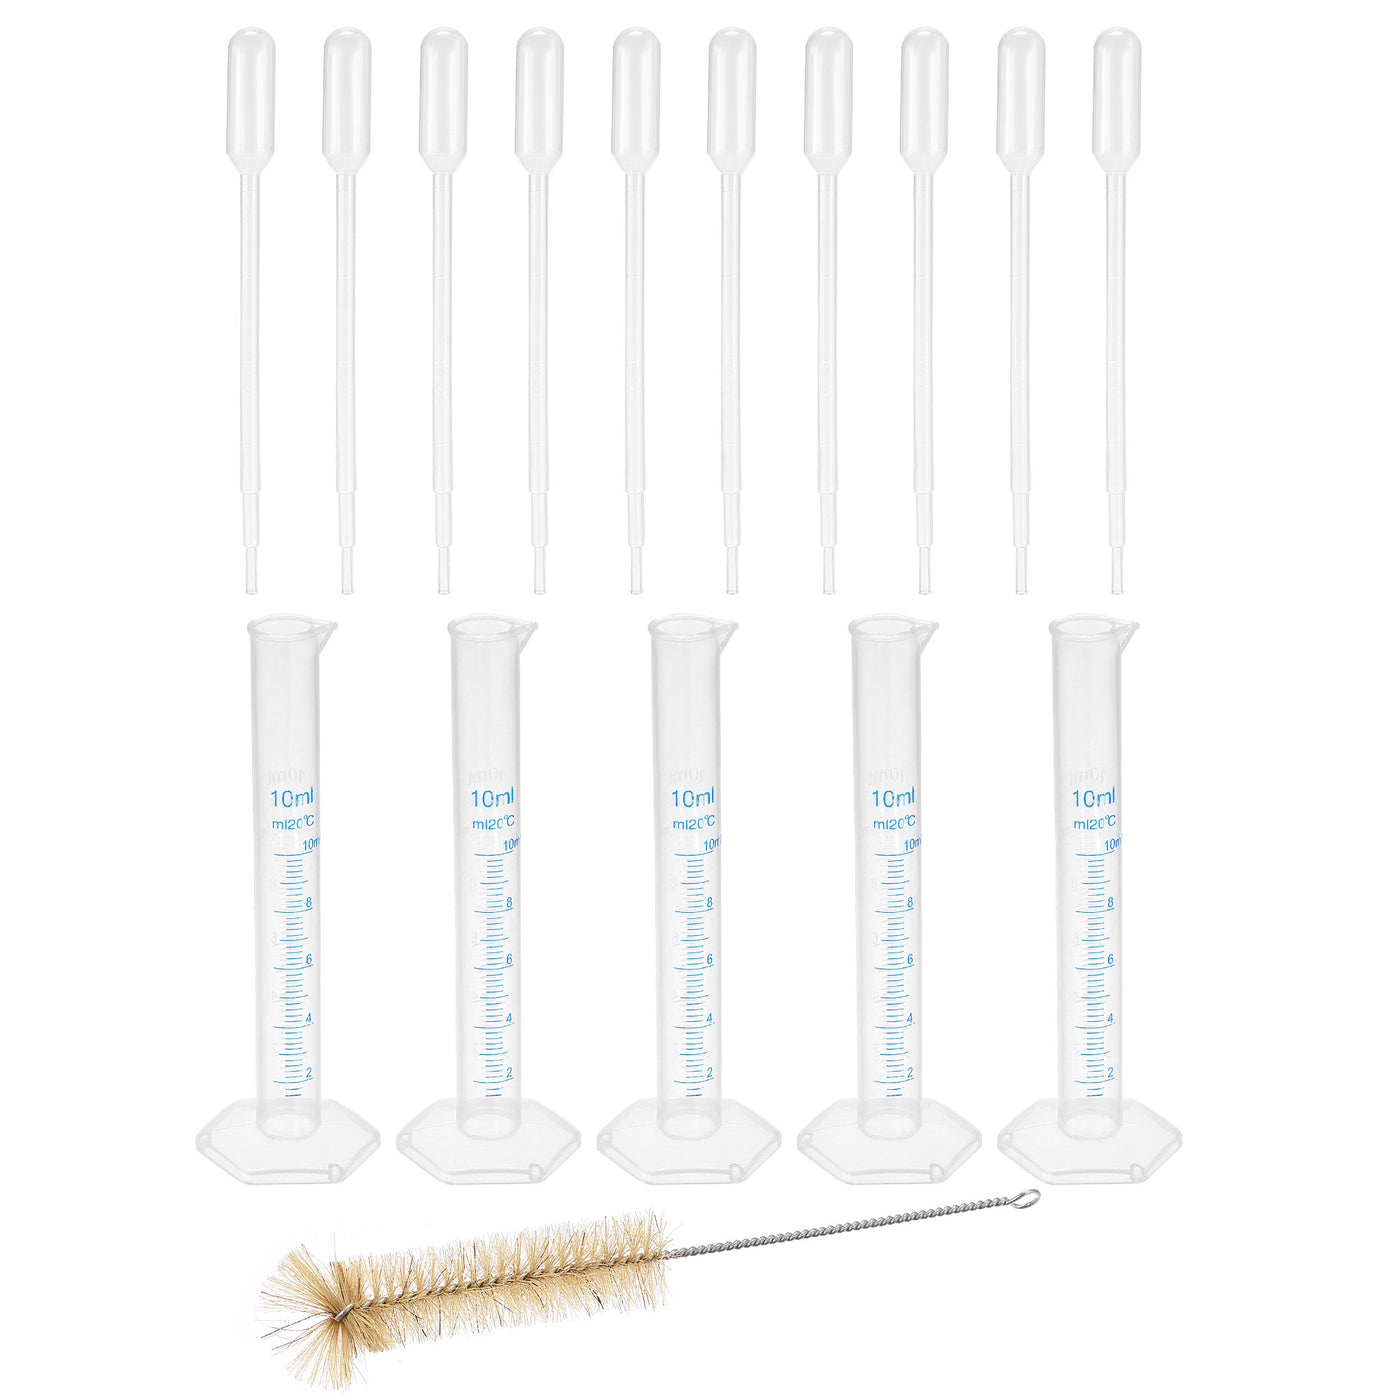 uxcell Uxcell Plastic Graduated Cylinder, 10ml Measuring Cylinder with 10 Transfer Pipettes and 1 Brush, 16in1 Set for Science Lab